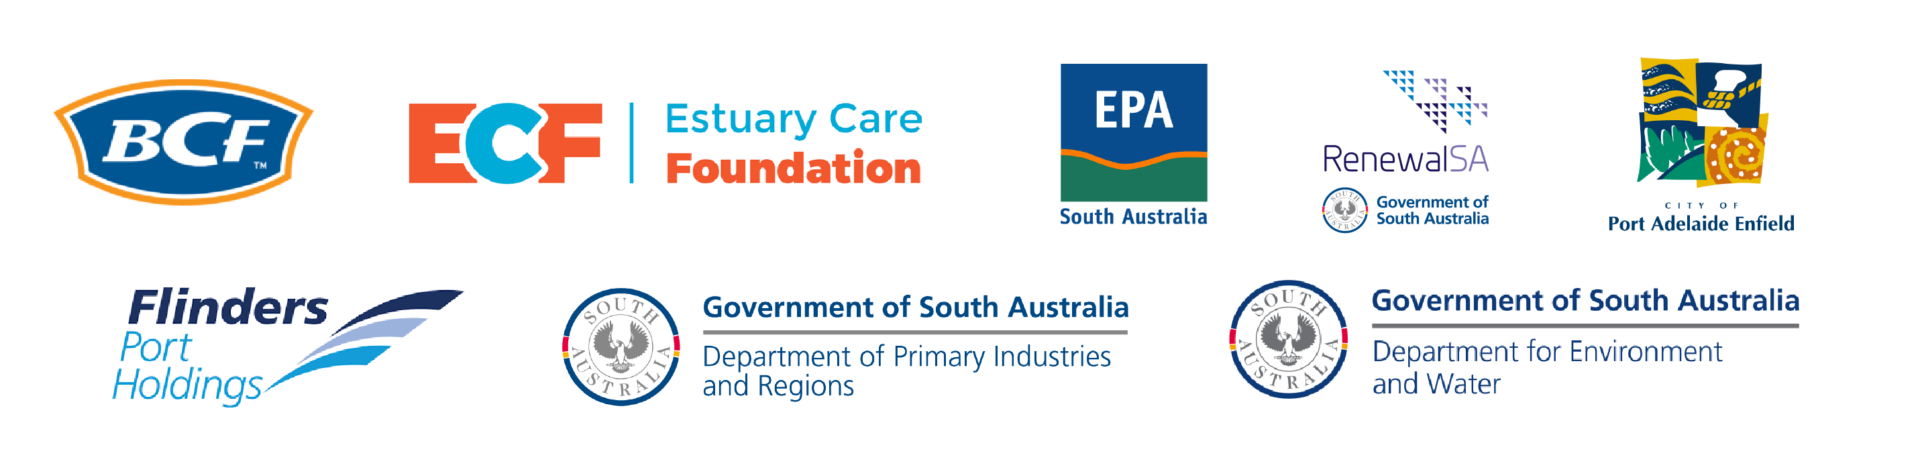 Estuary Care Foundation, Environment protection authority (EPA), Department of Environment and Heritage, Renewal SA, Primary Industries and Regions South Australia (PIRSA), Flinders Port Holdings, City of Port Adelaide and BCF – Boating, Camping, Fishing logos stacked